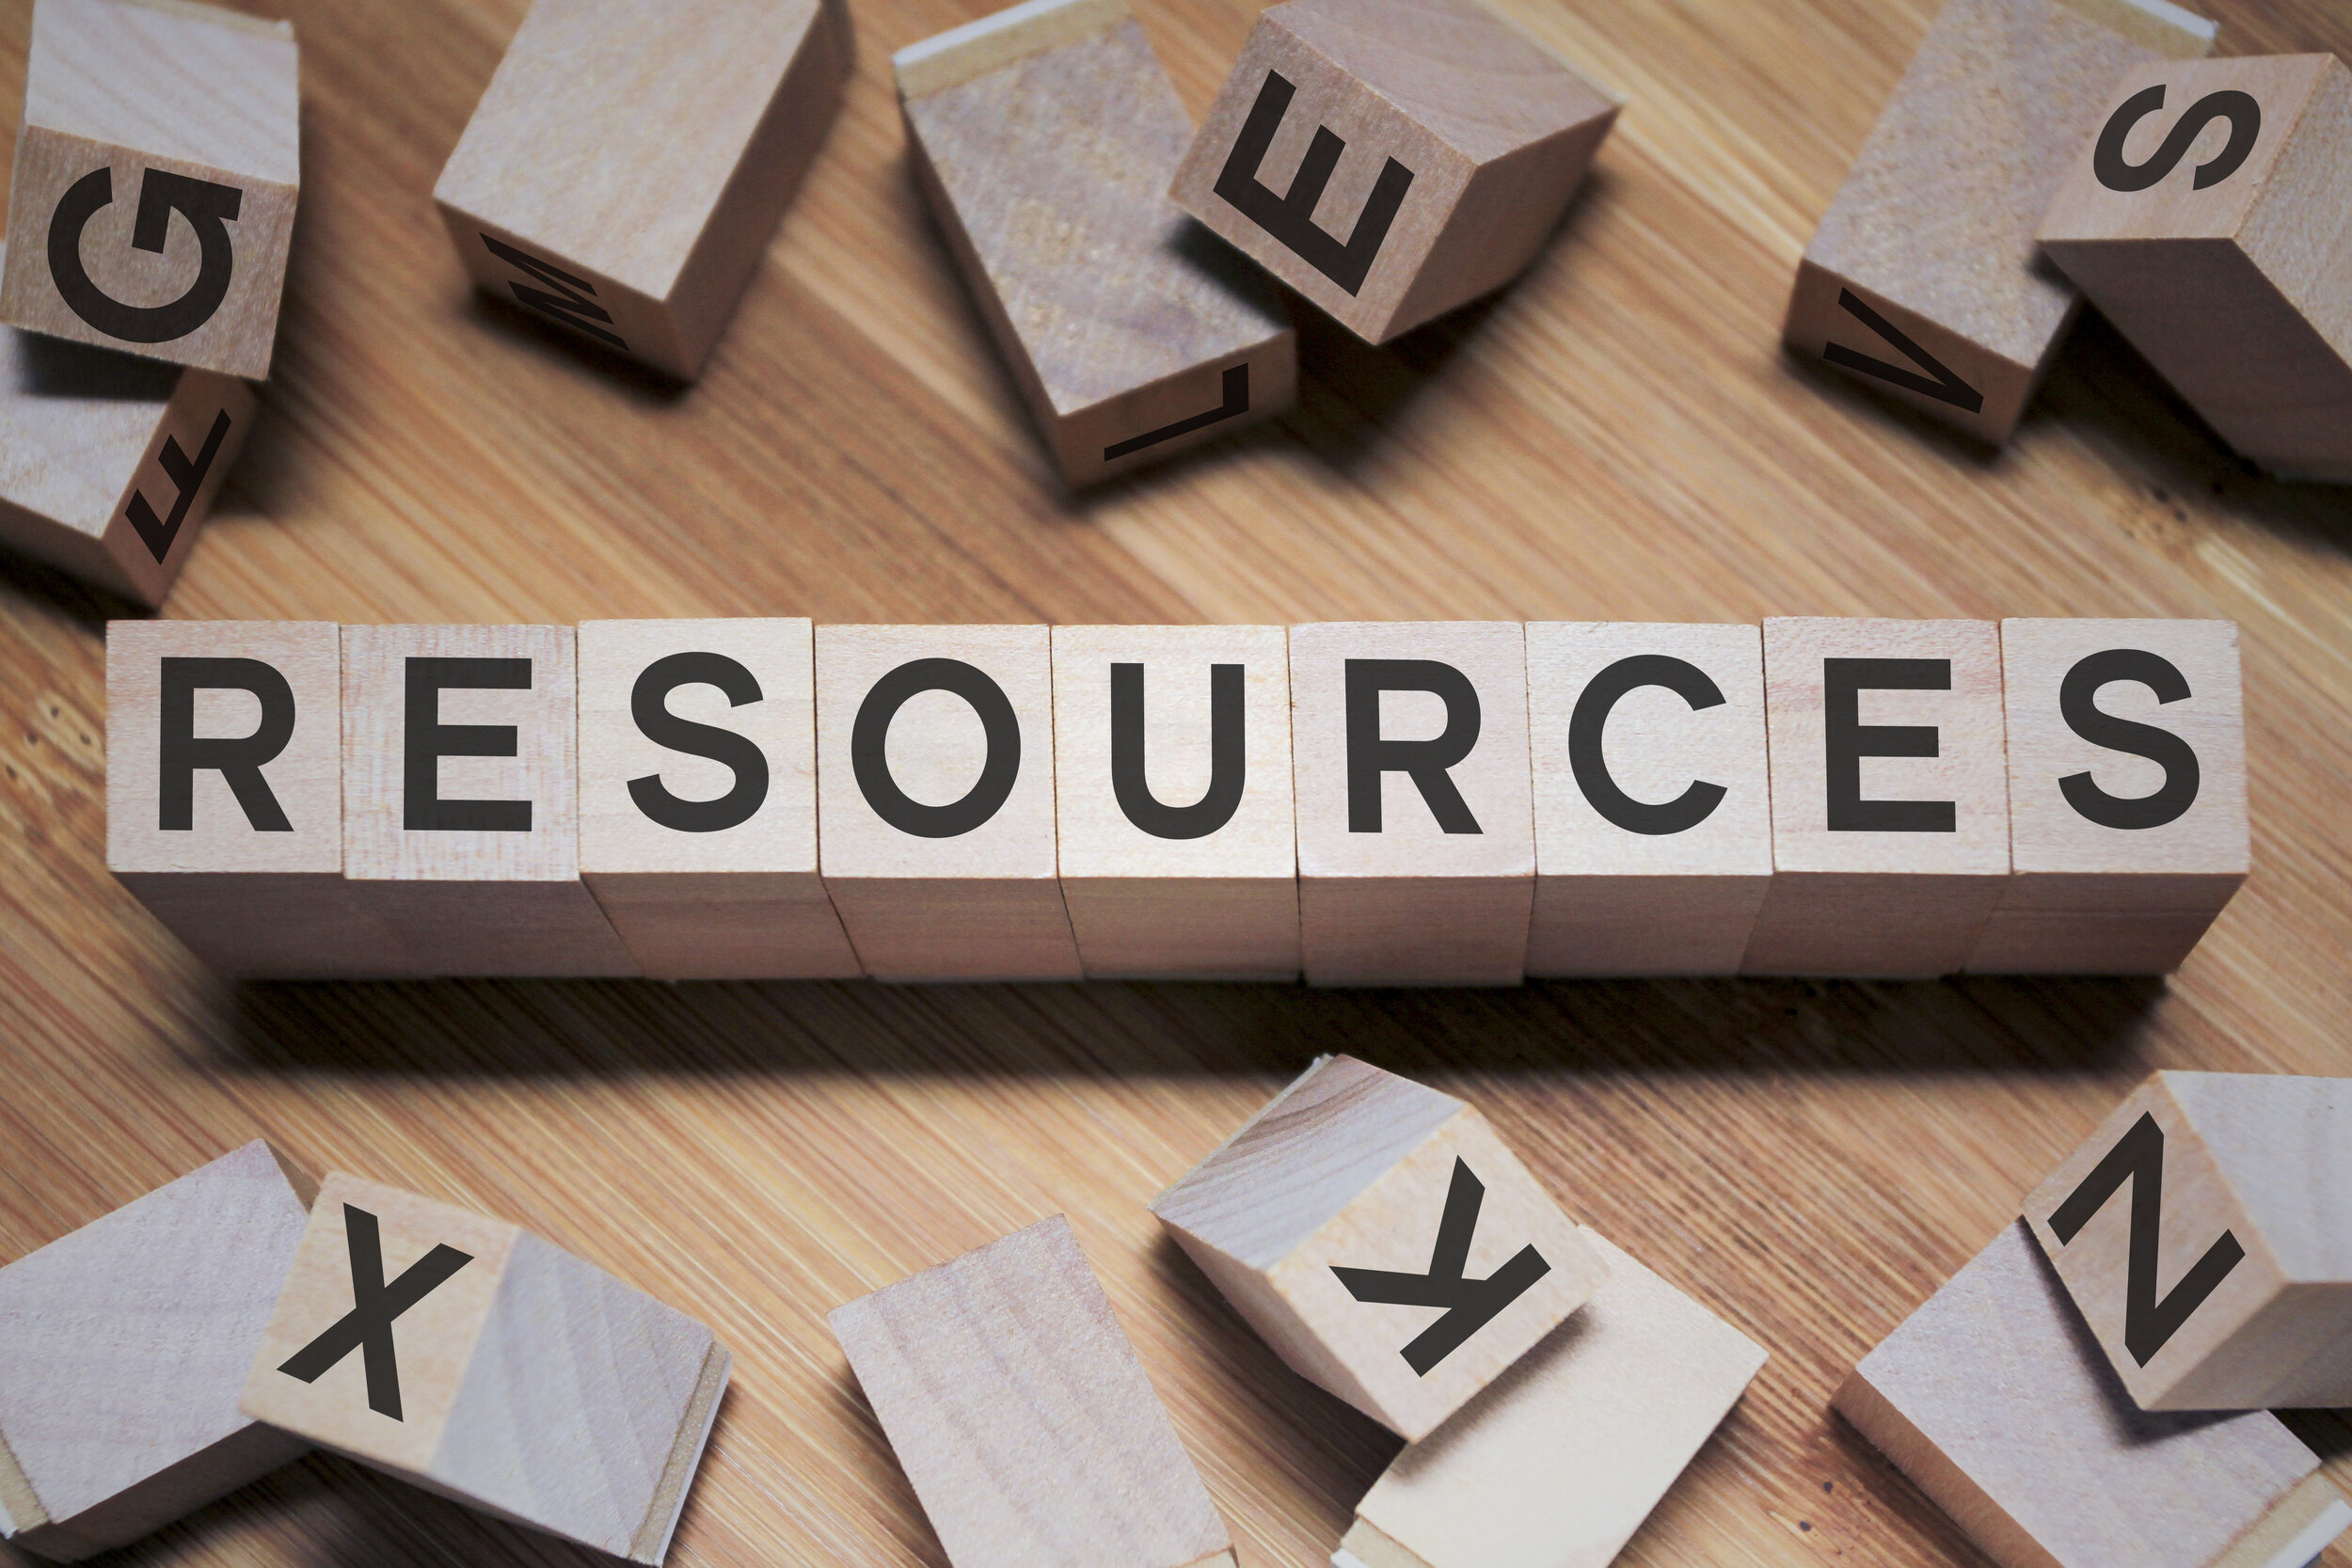 Resources-Word-In-Wooden-Cube-1181567551_5184x3456.jpeg